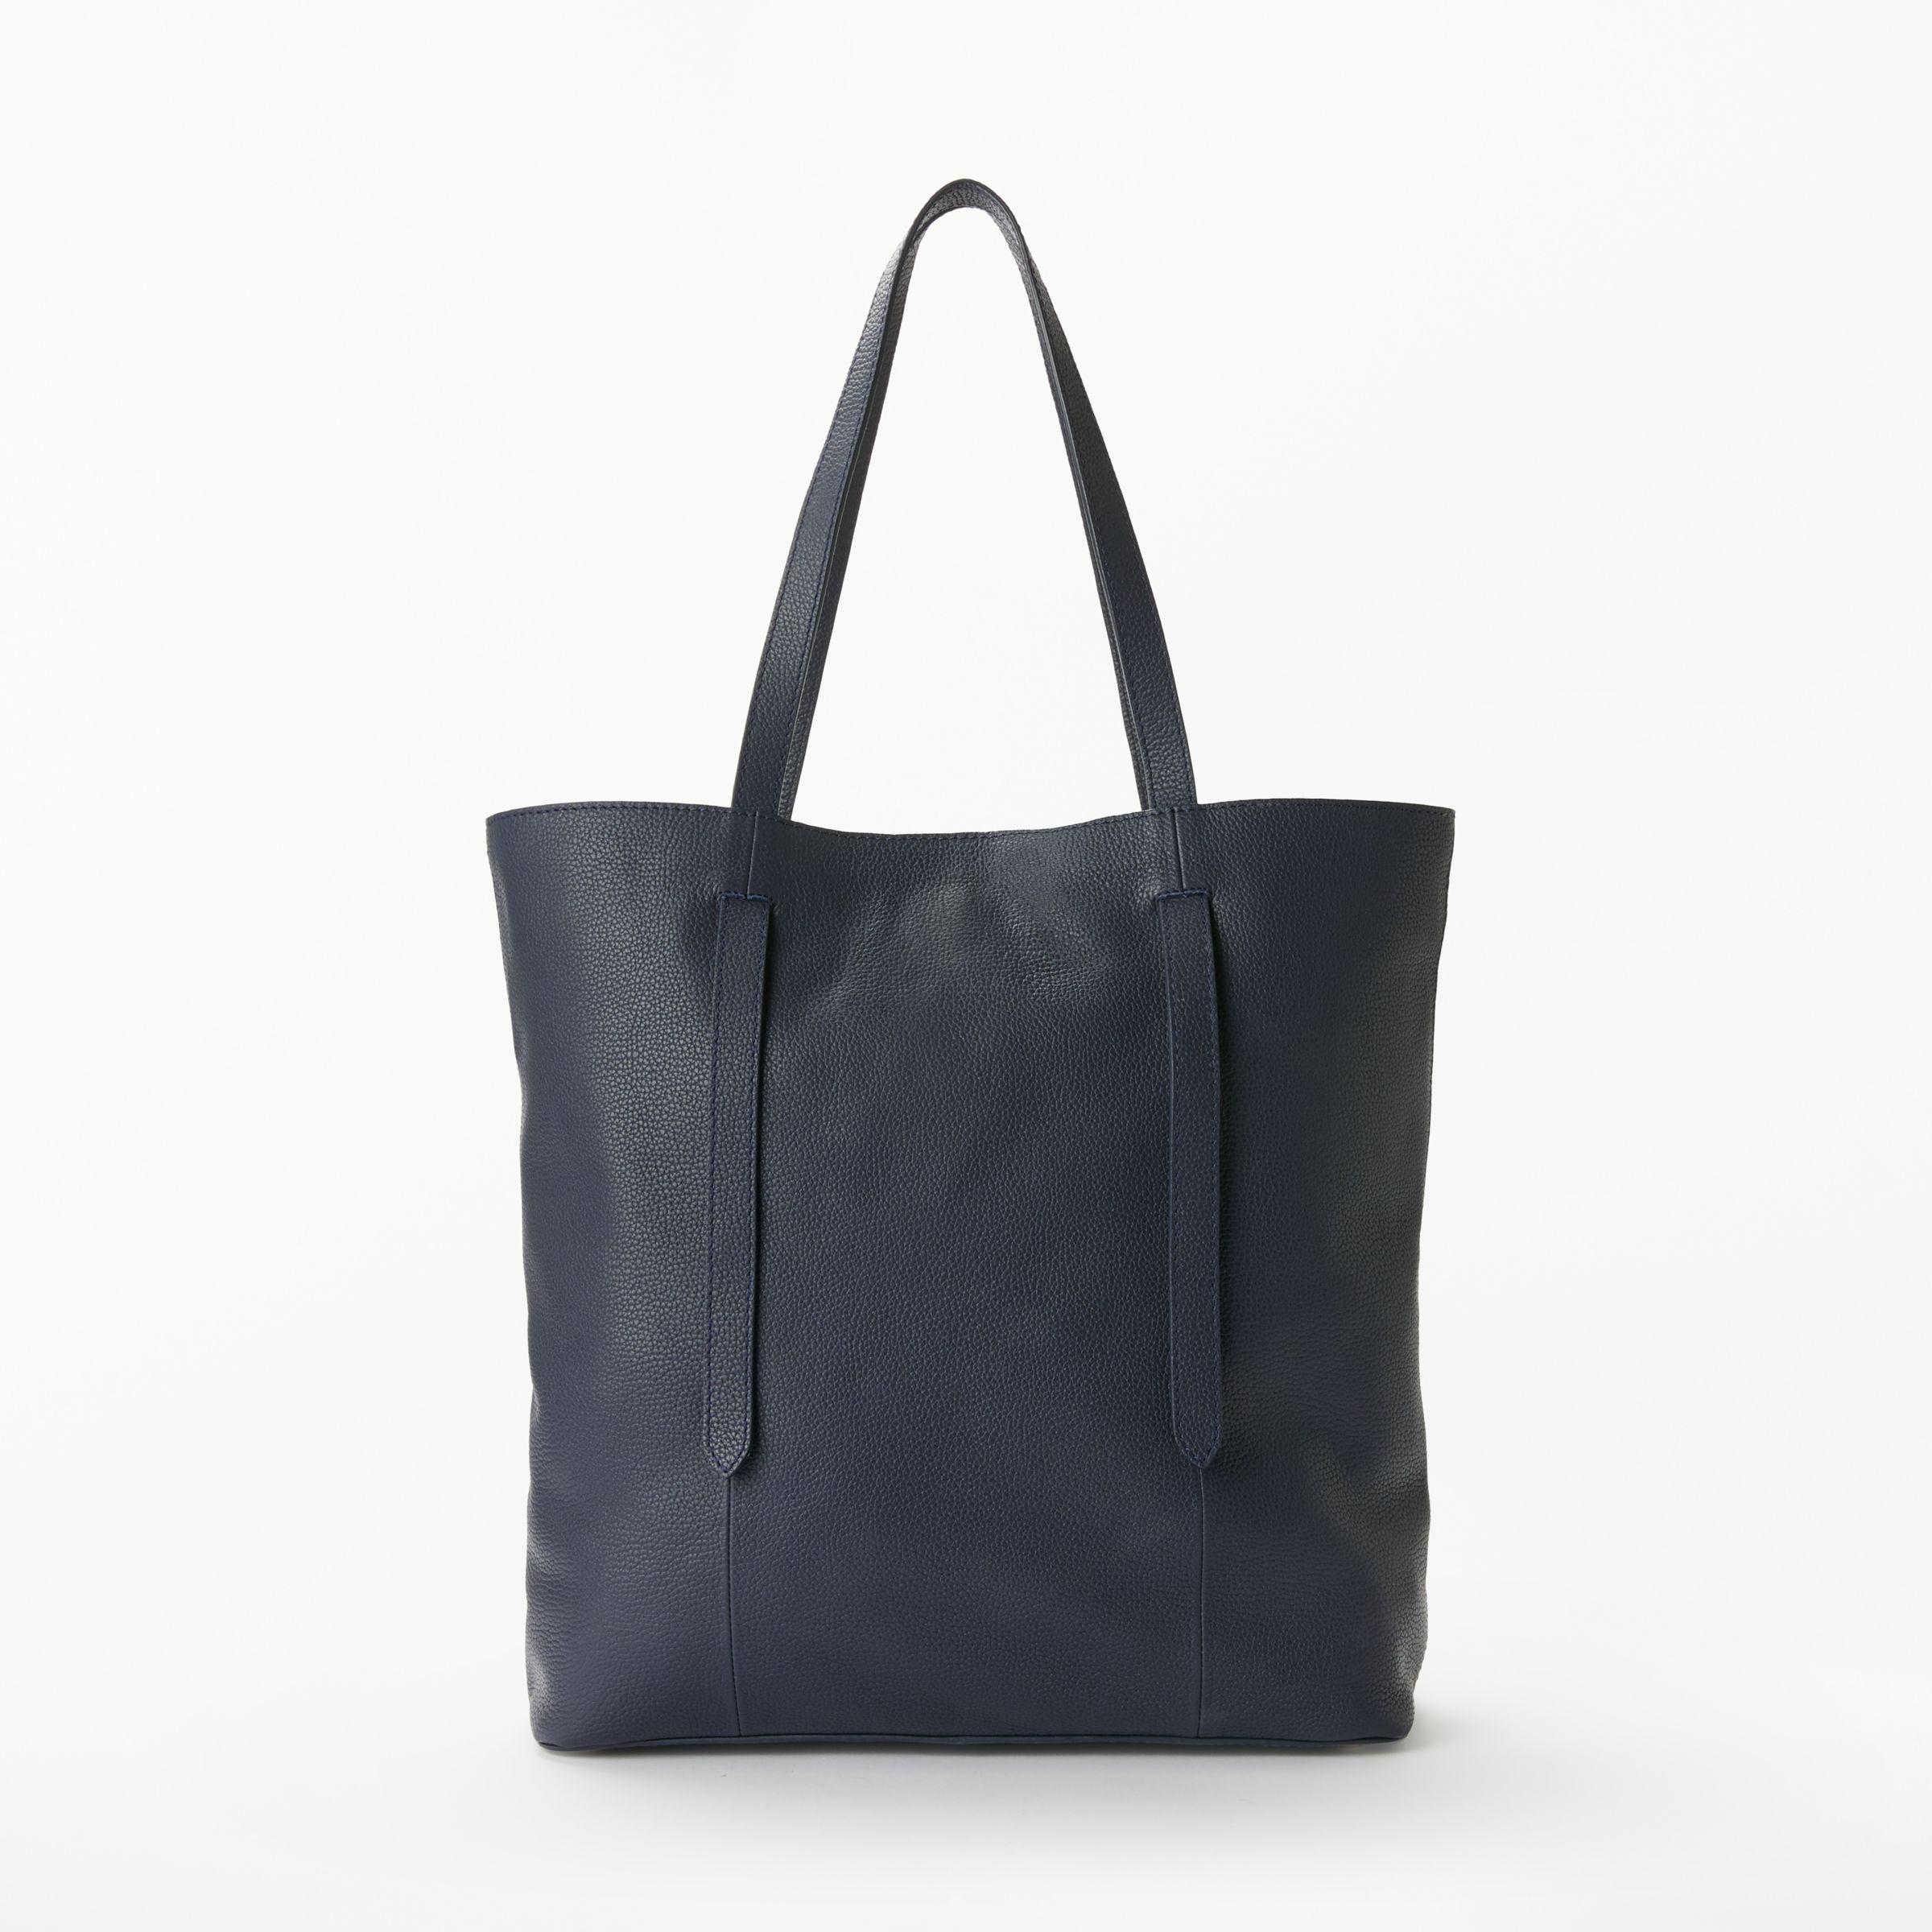 John Lewis & Partners Cecilia Leather North/South Tote Bag